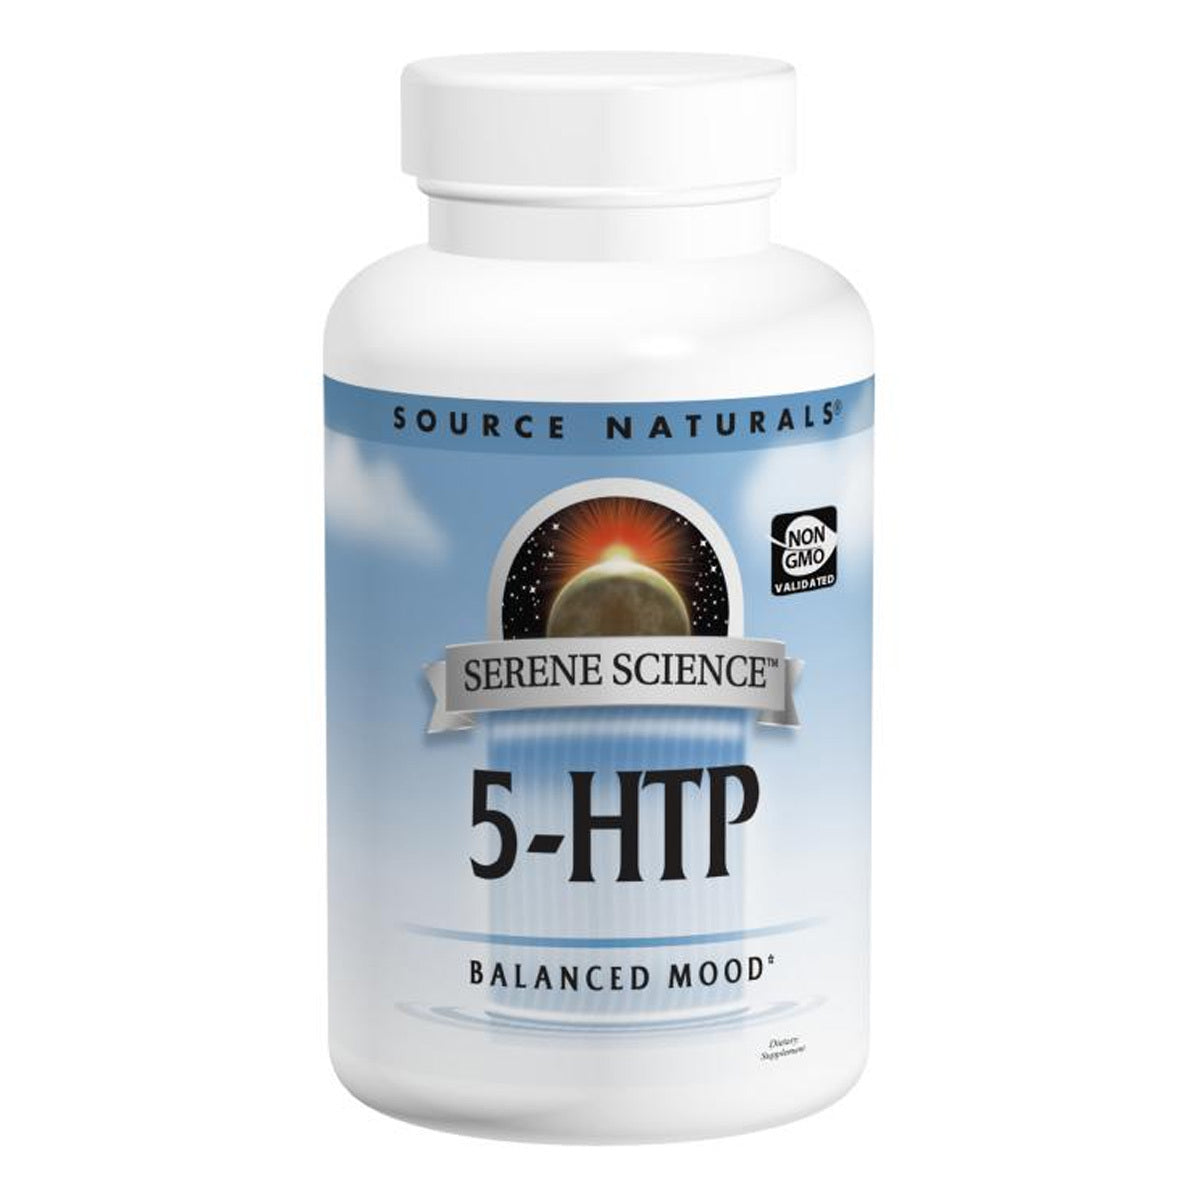 Primary image of Serene Science 5-HTP 50mg caps